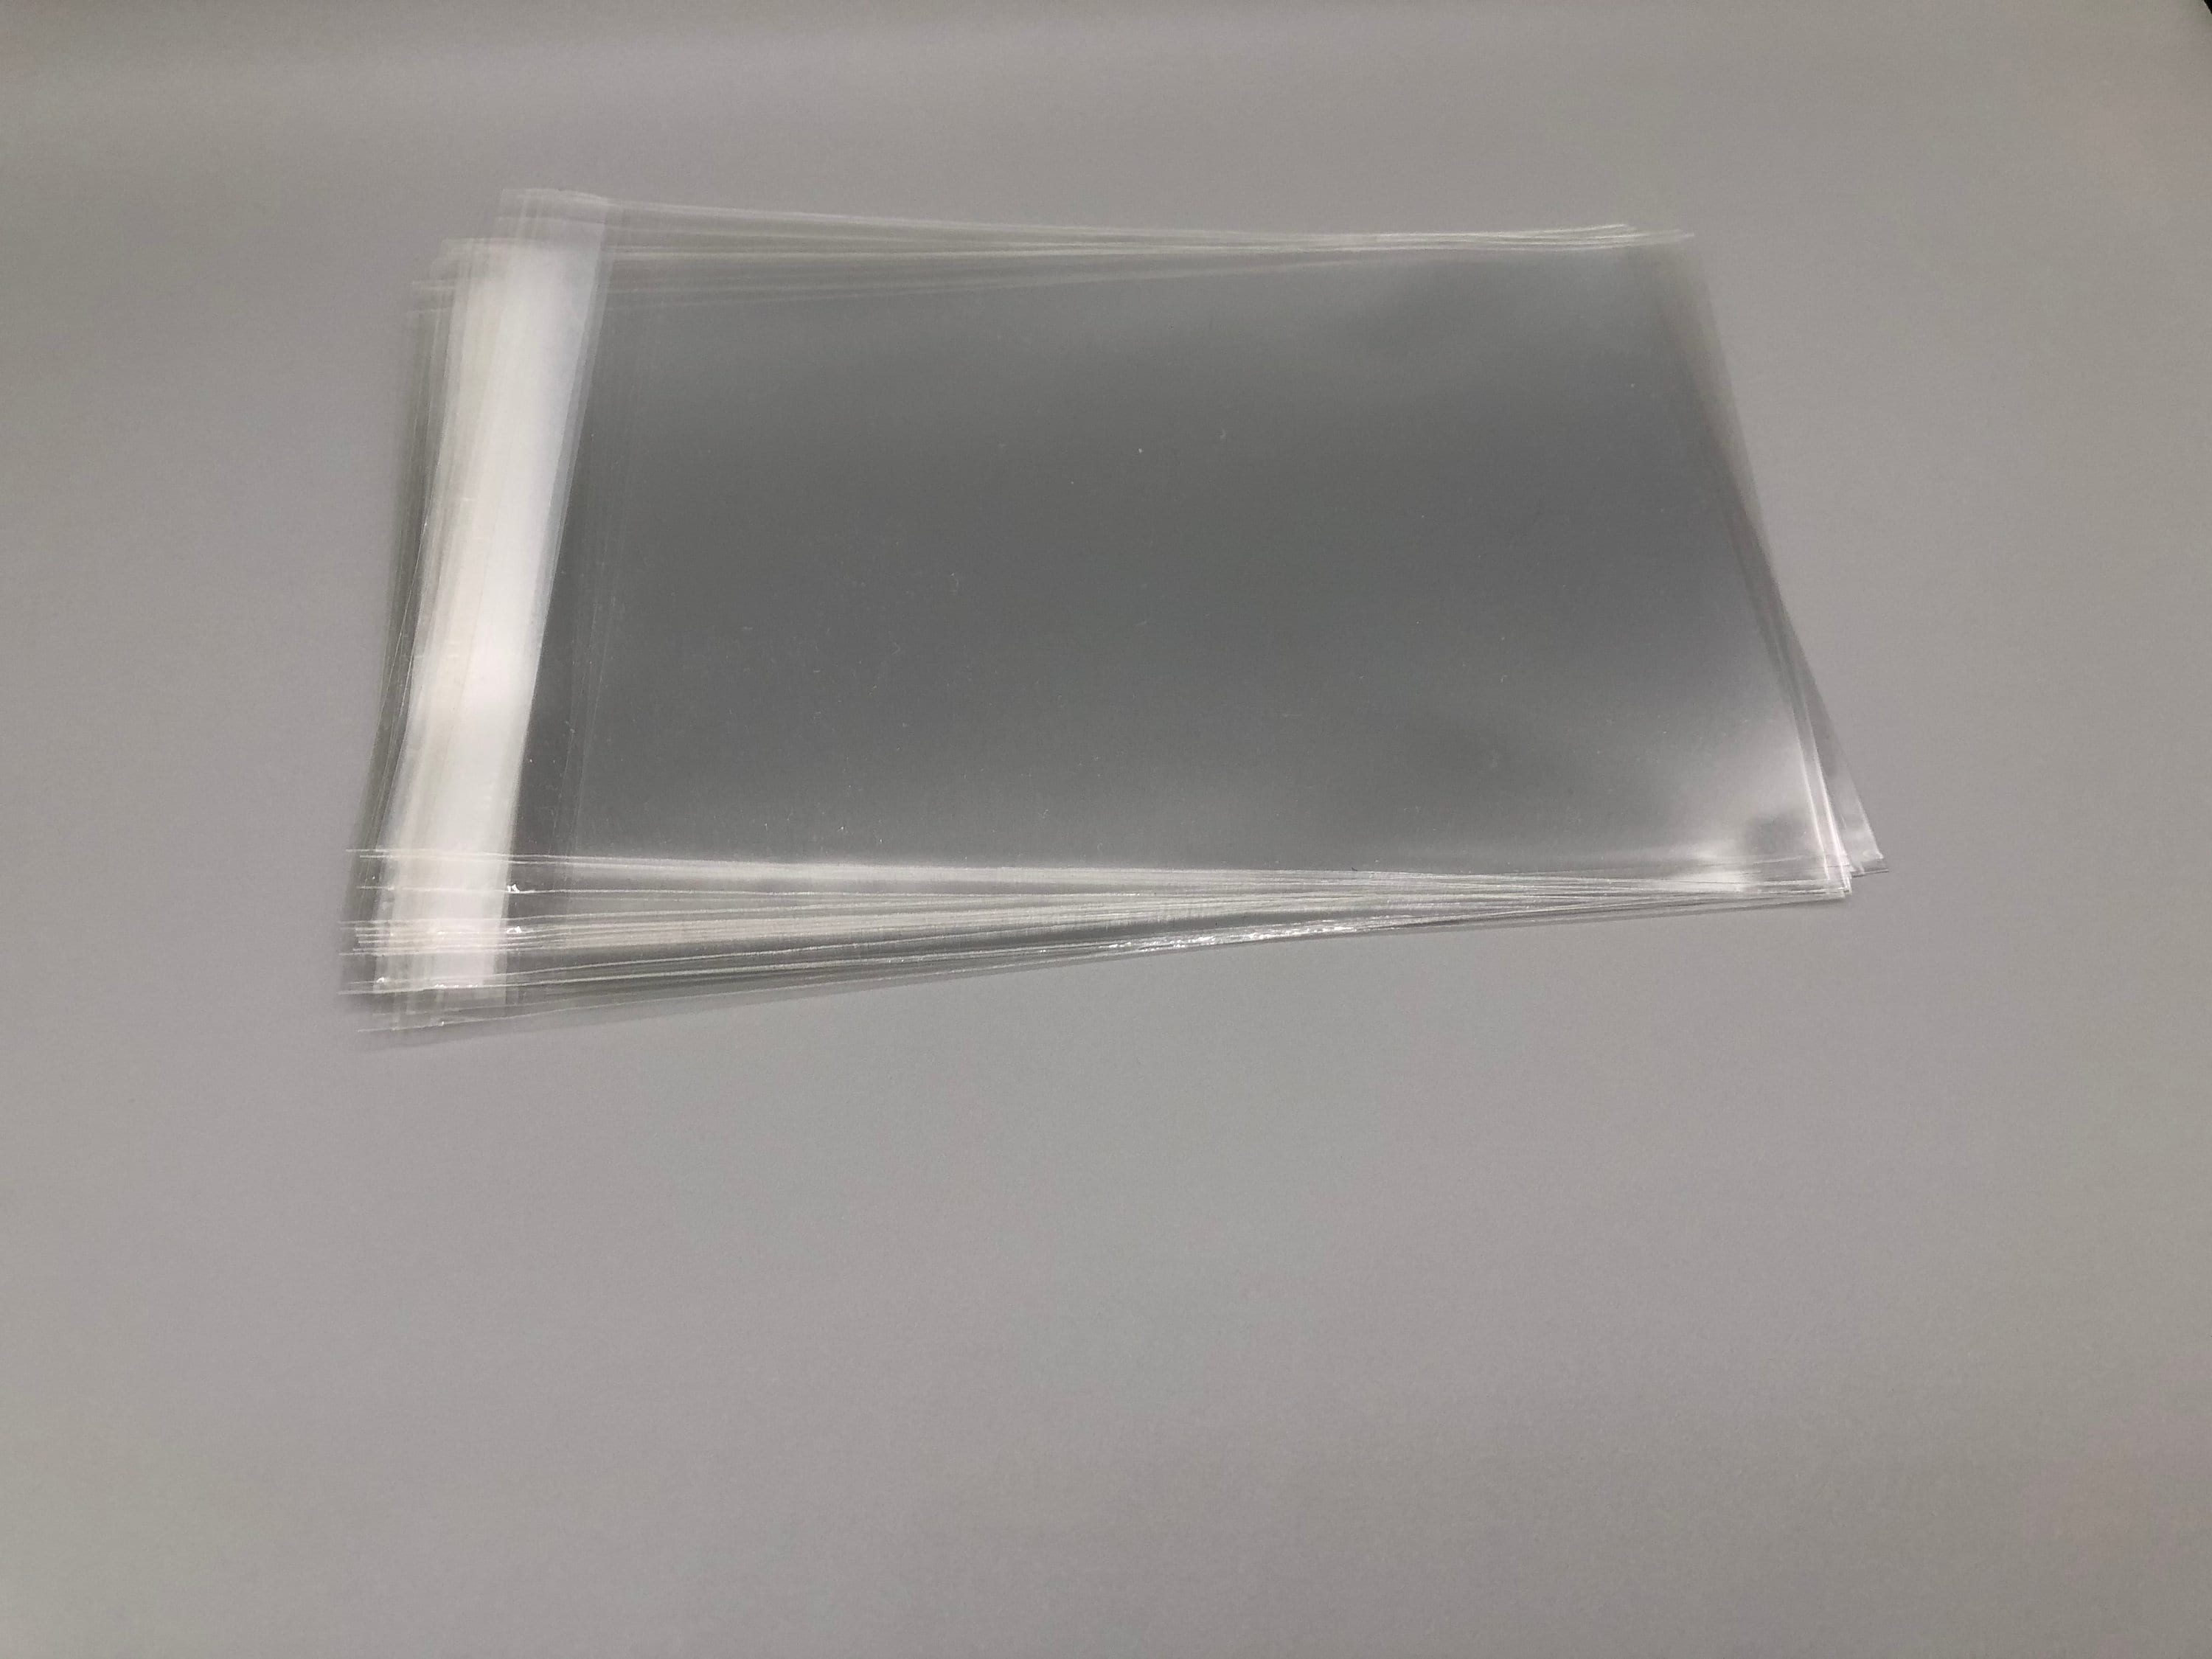  AUEAR, 5x7 (100 Pack) Clear Plastic Sleeves - Acid Free  1.6mil Crystal Resealable Clear Bags -Fit for 5x7 Art Prints, Photos, Cards  & Envelope : Office Products